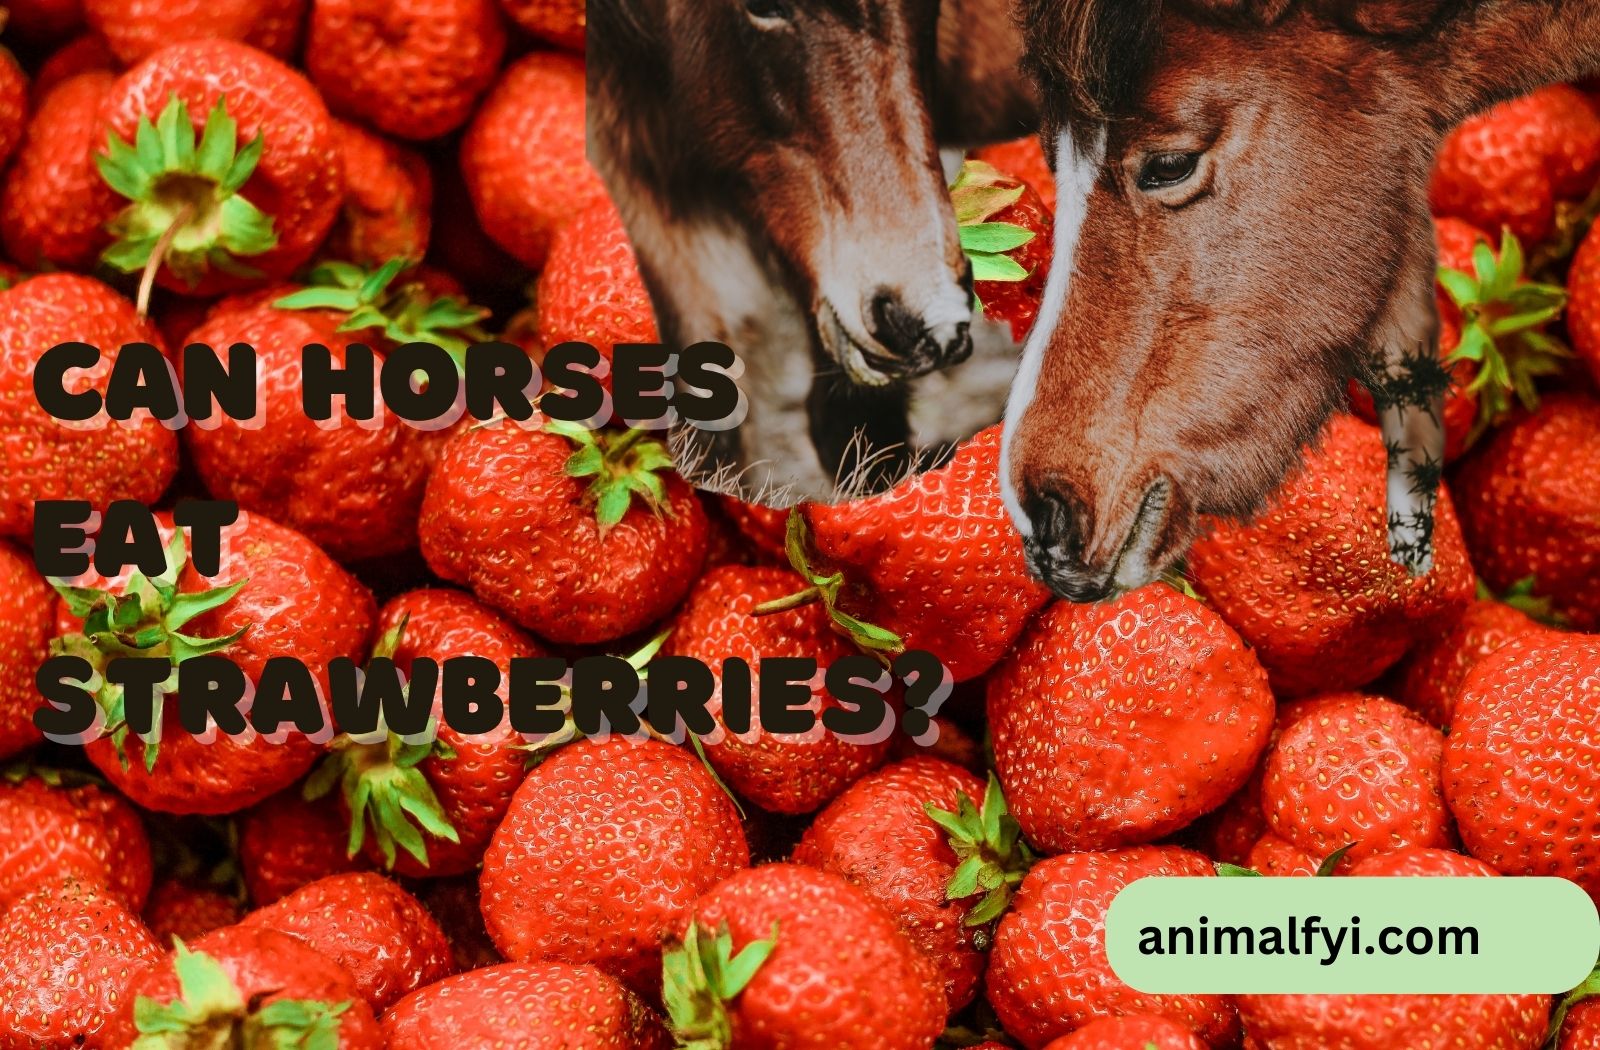 Can Horses Eat Strawberries?